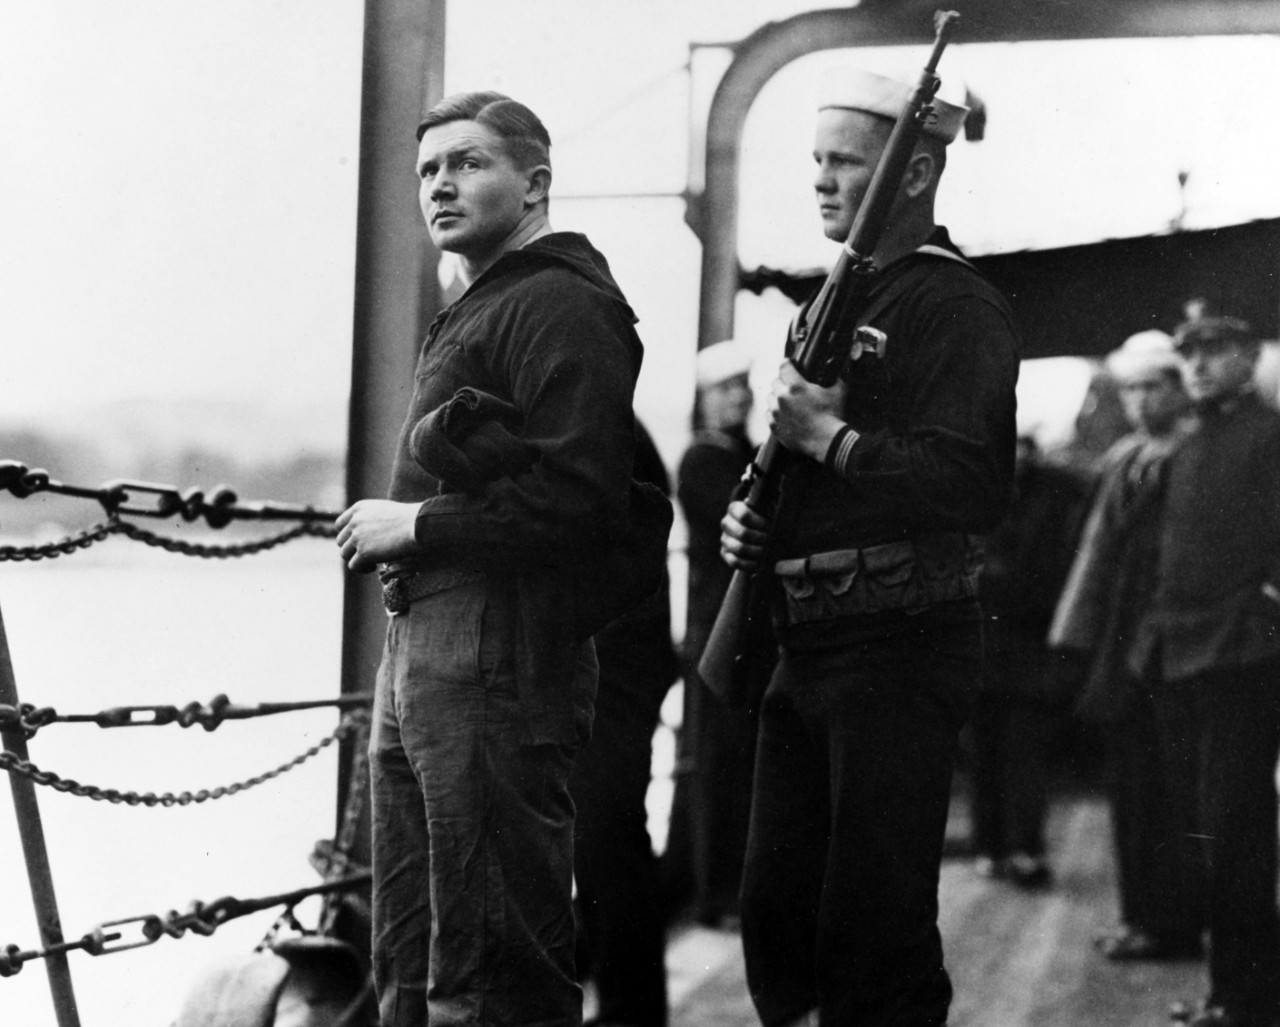 Photograph of captured German submariners